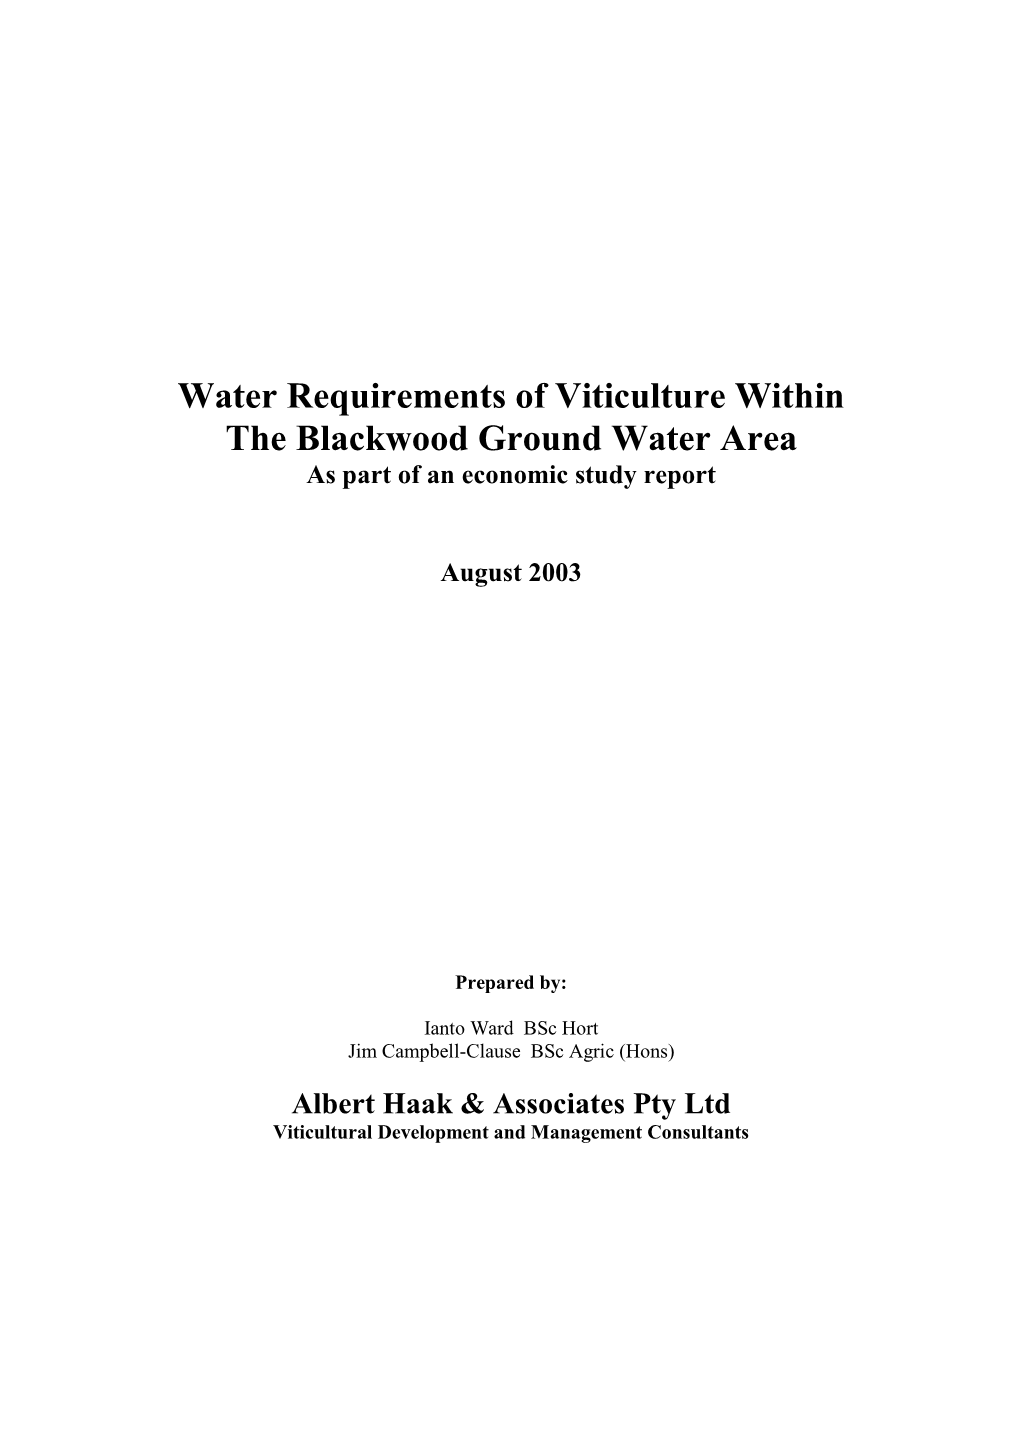 Water Requirements of Viticulture Within the Blackwood Ground Water Area As Part of an Economic Study Report